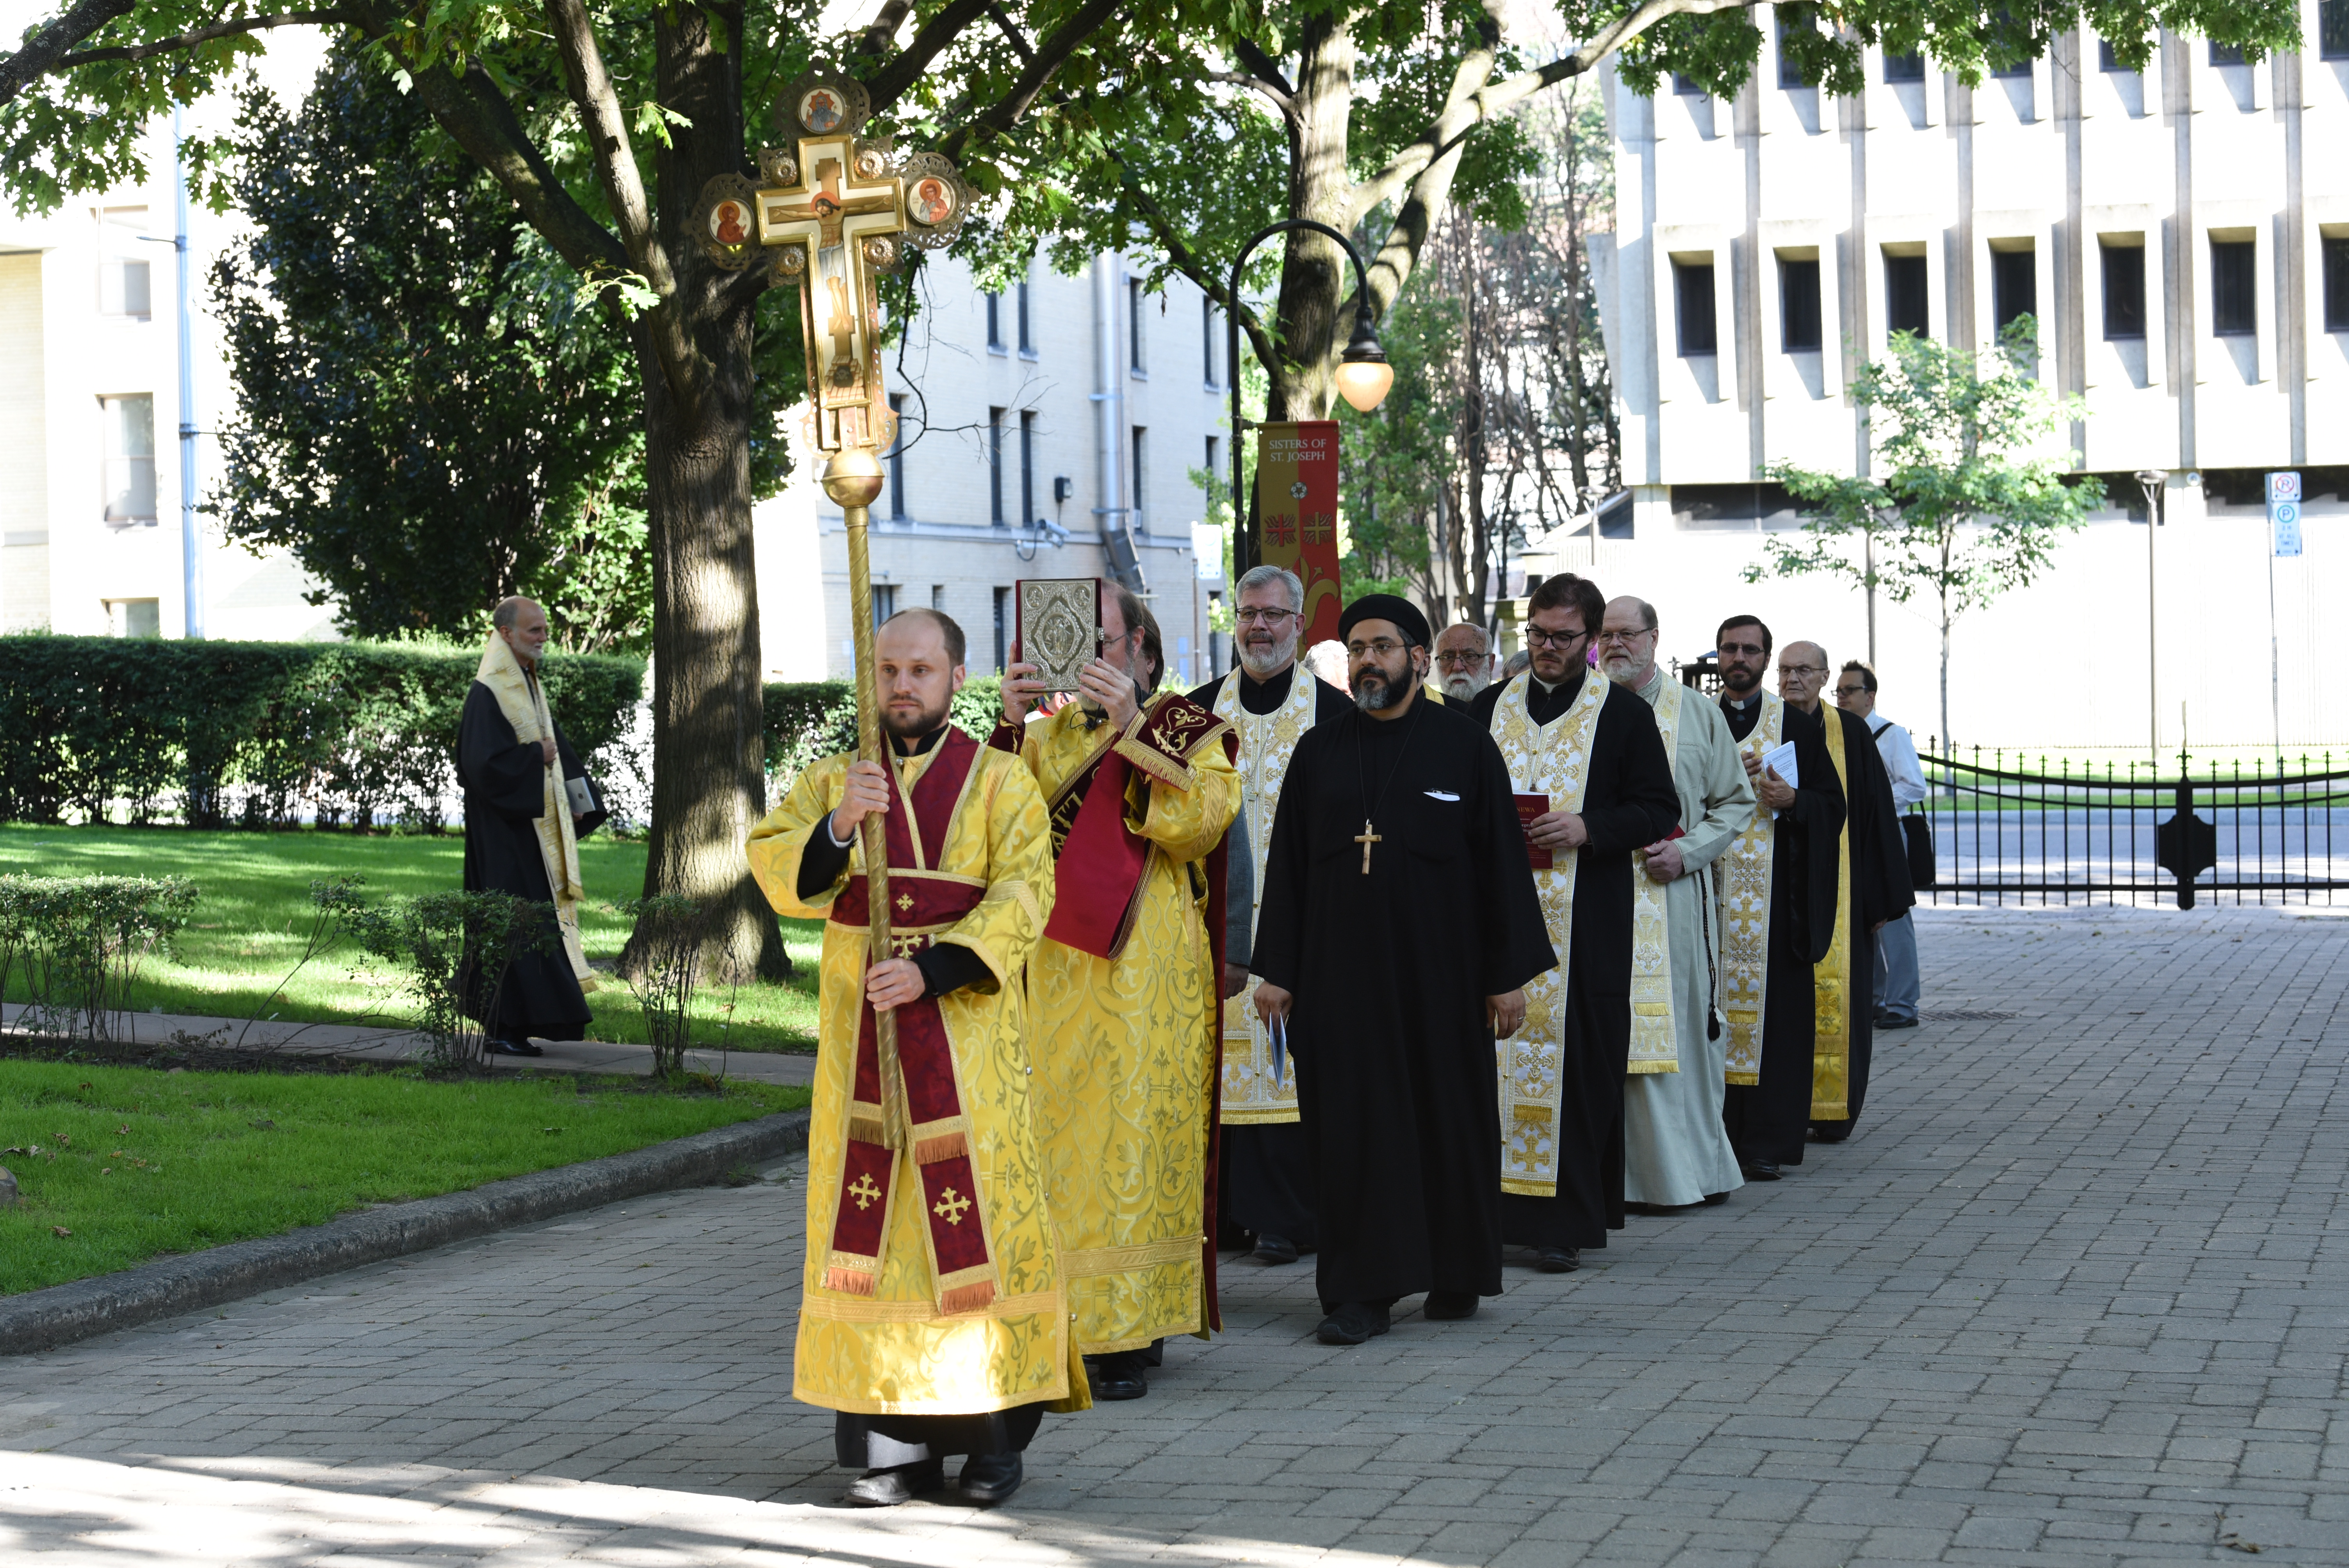 The image depicts various religious people walking calmly in a line with the lead person holding a large golden scepter.